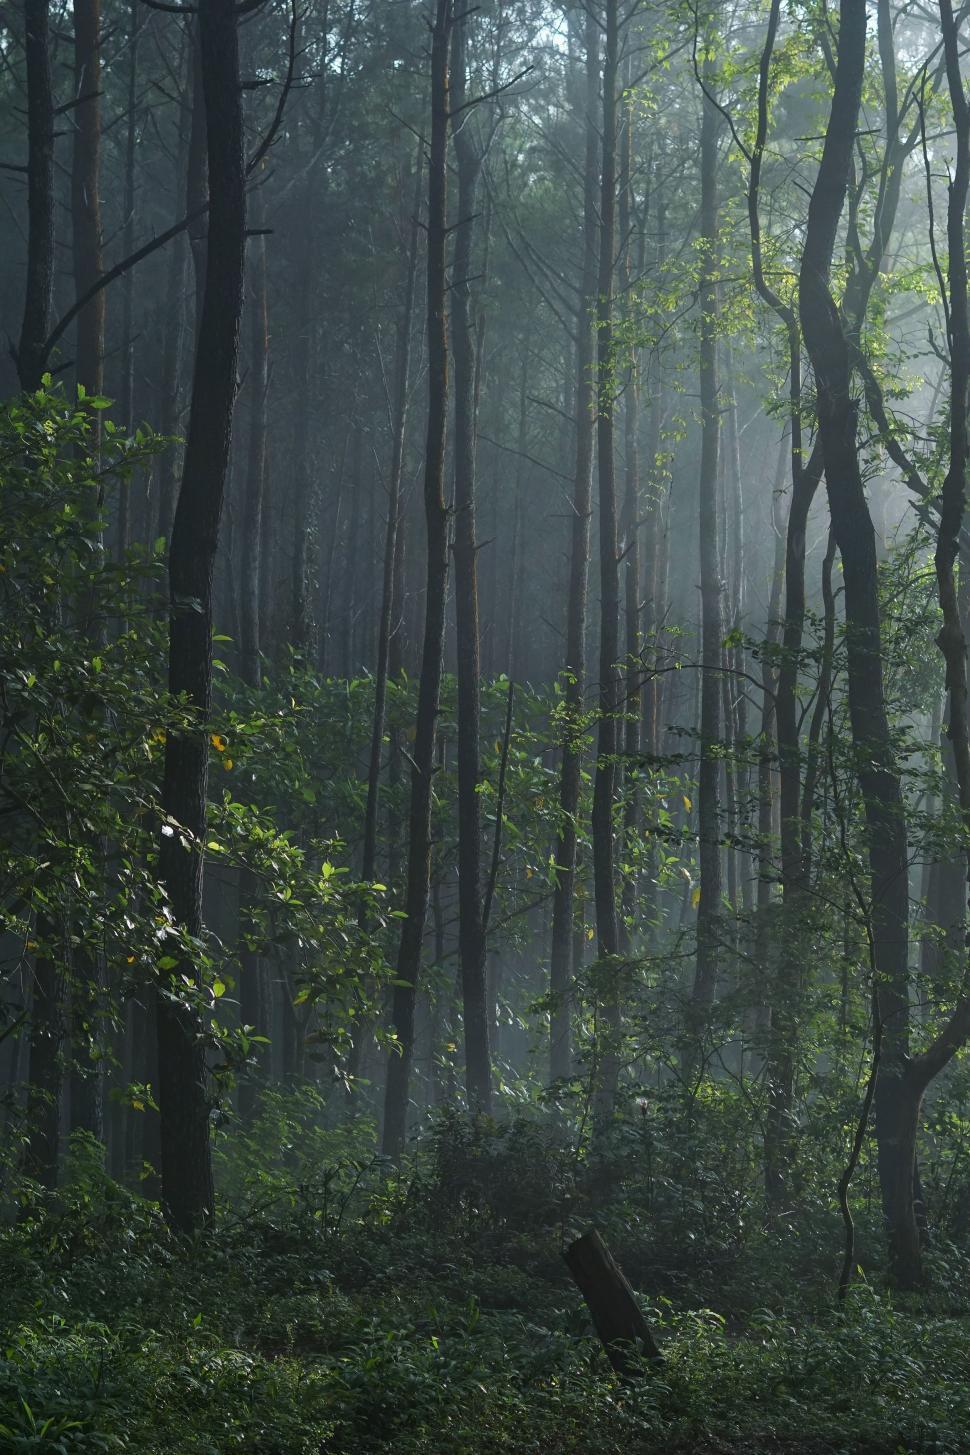 Free Image of Misty Forest With Dense Trees 